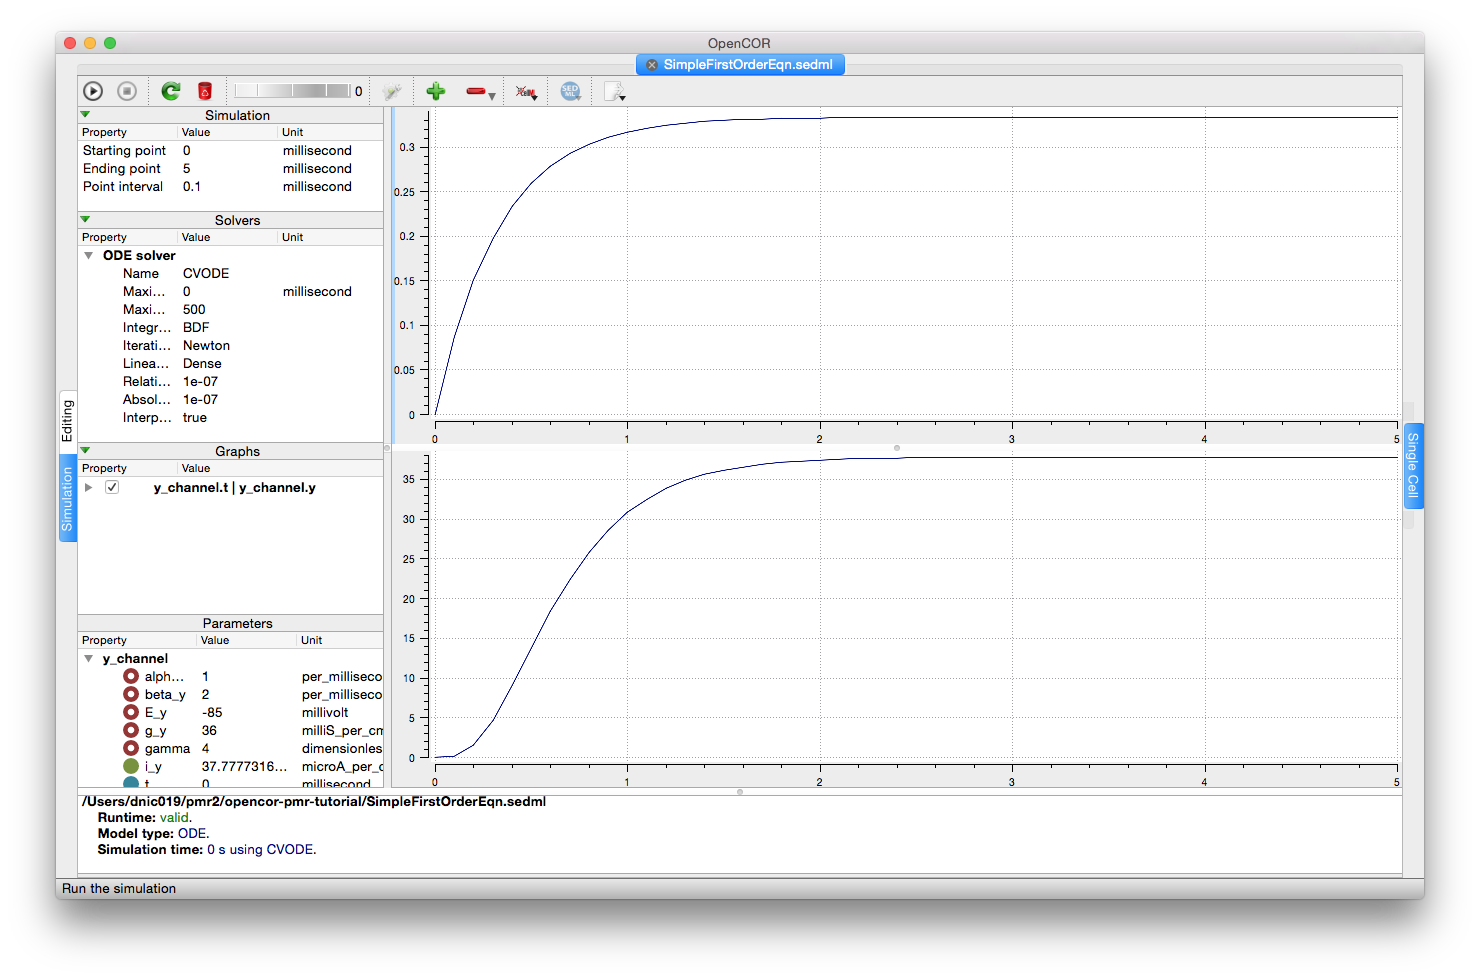 Screenshot illustrating the results of executing this first order equation simulation experiment in OpenCOR.